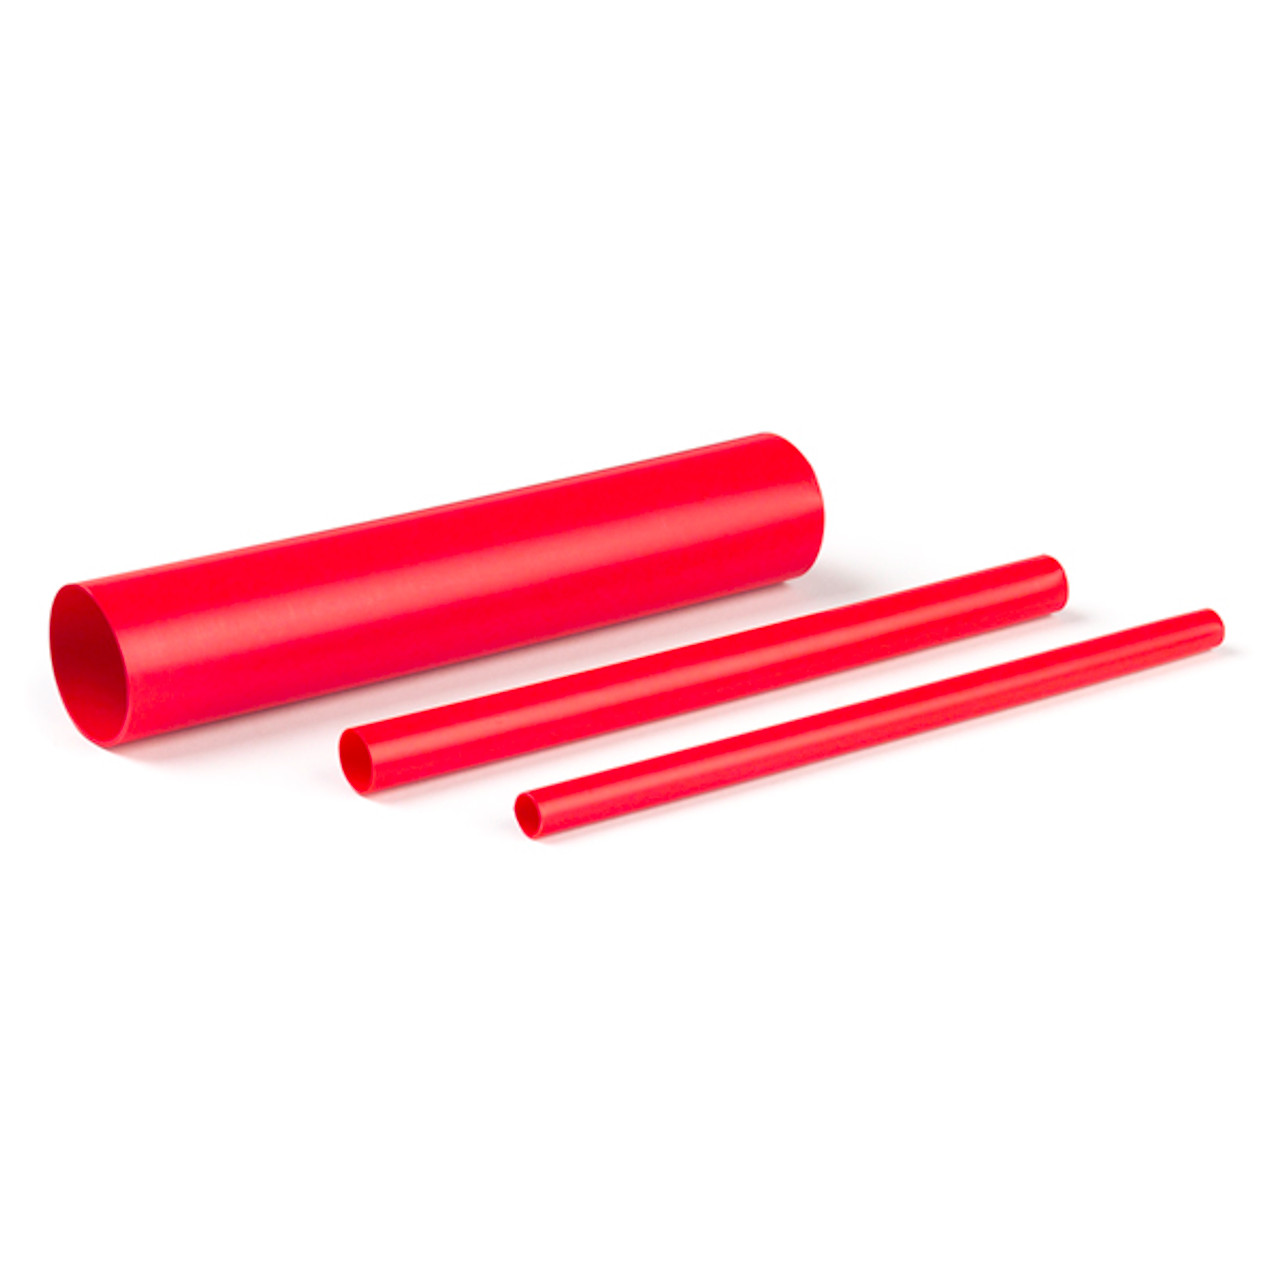 1/4" Dual Wall 3:1 Heat Shrink Tubing 48" @ 6 Pack - Red  84-6100-48